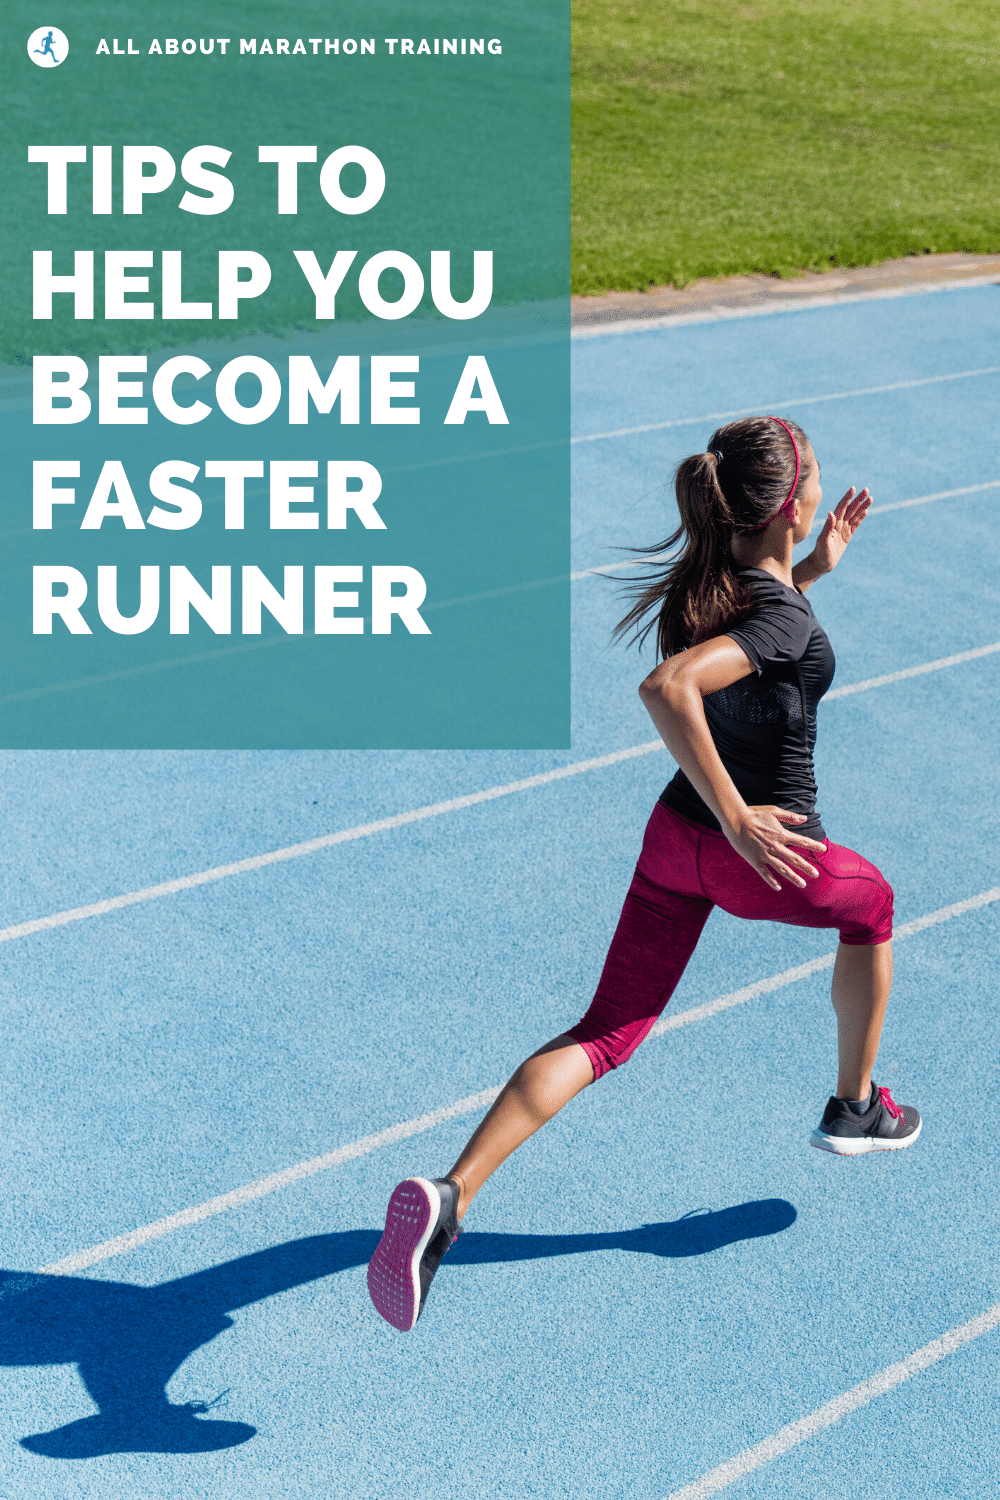 How to Run Faster